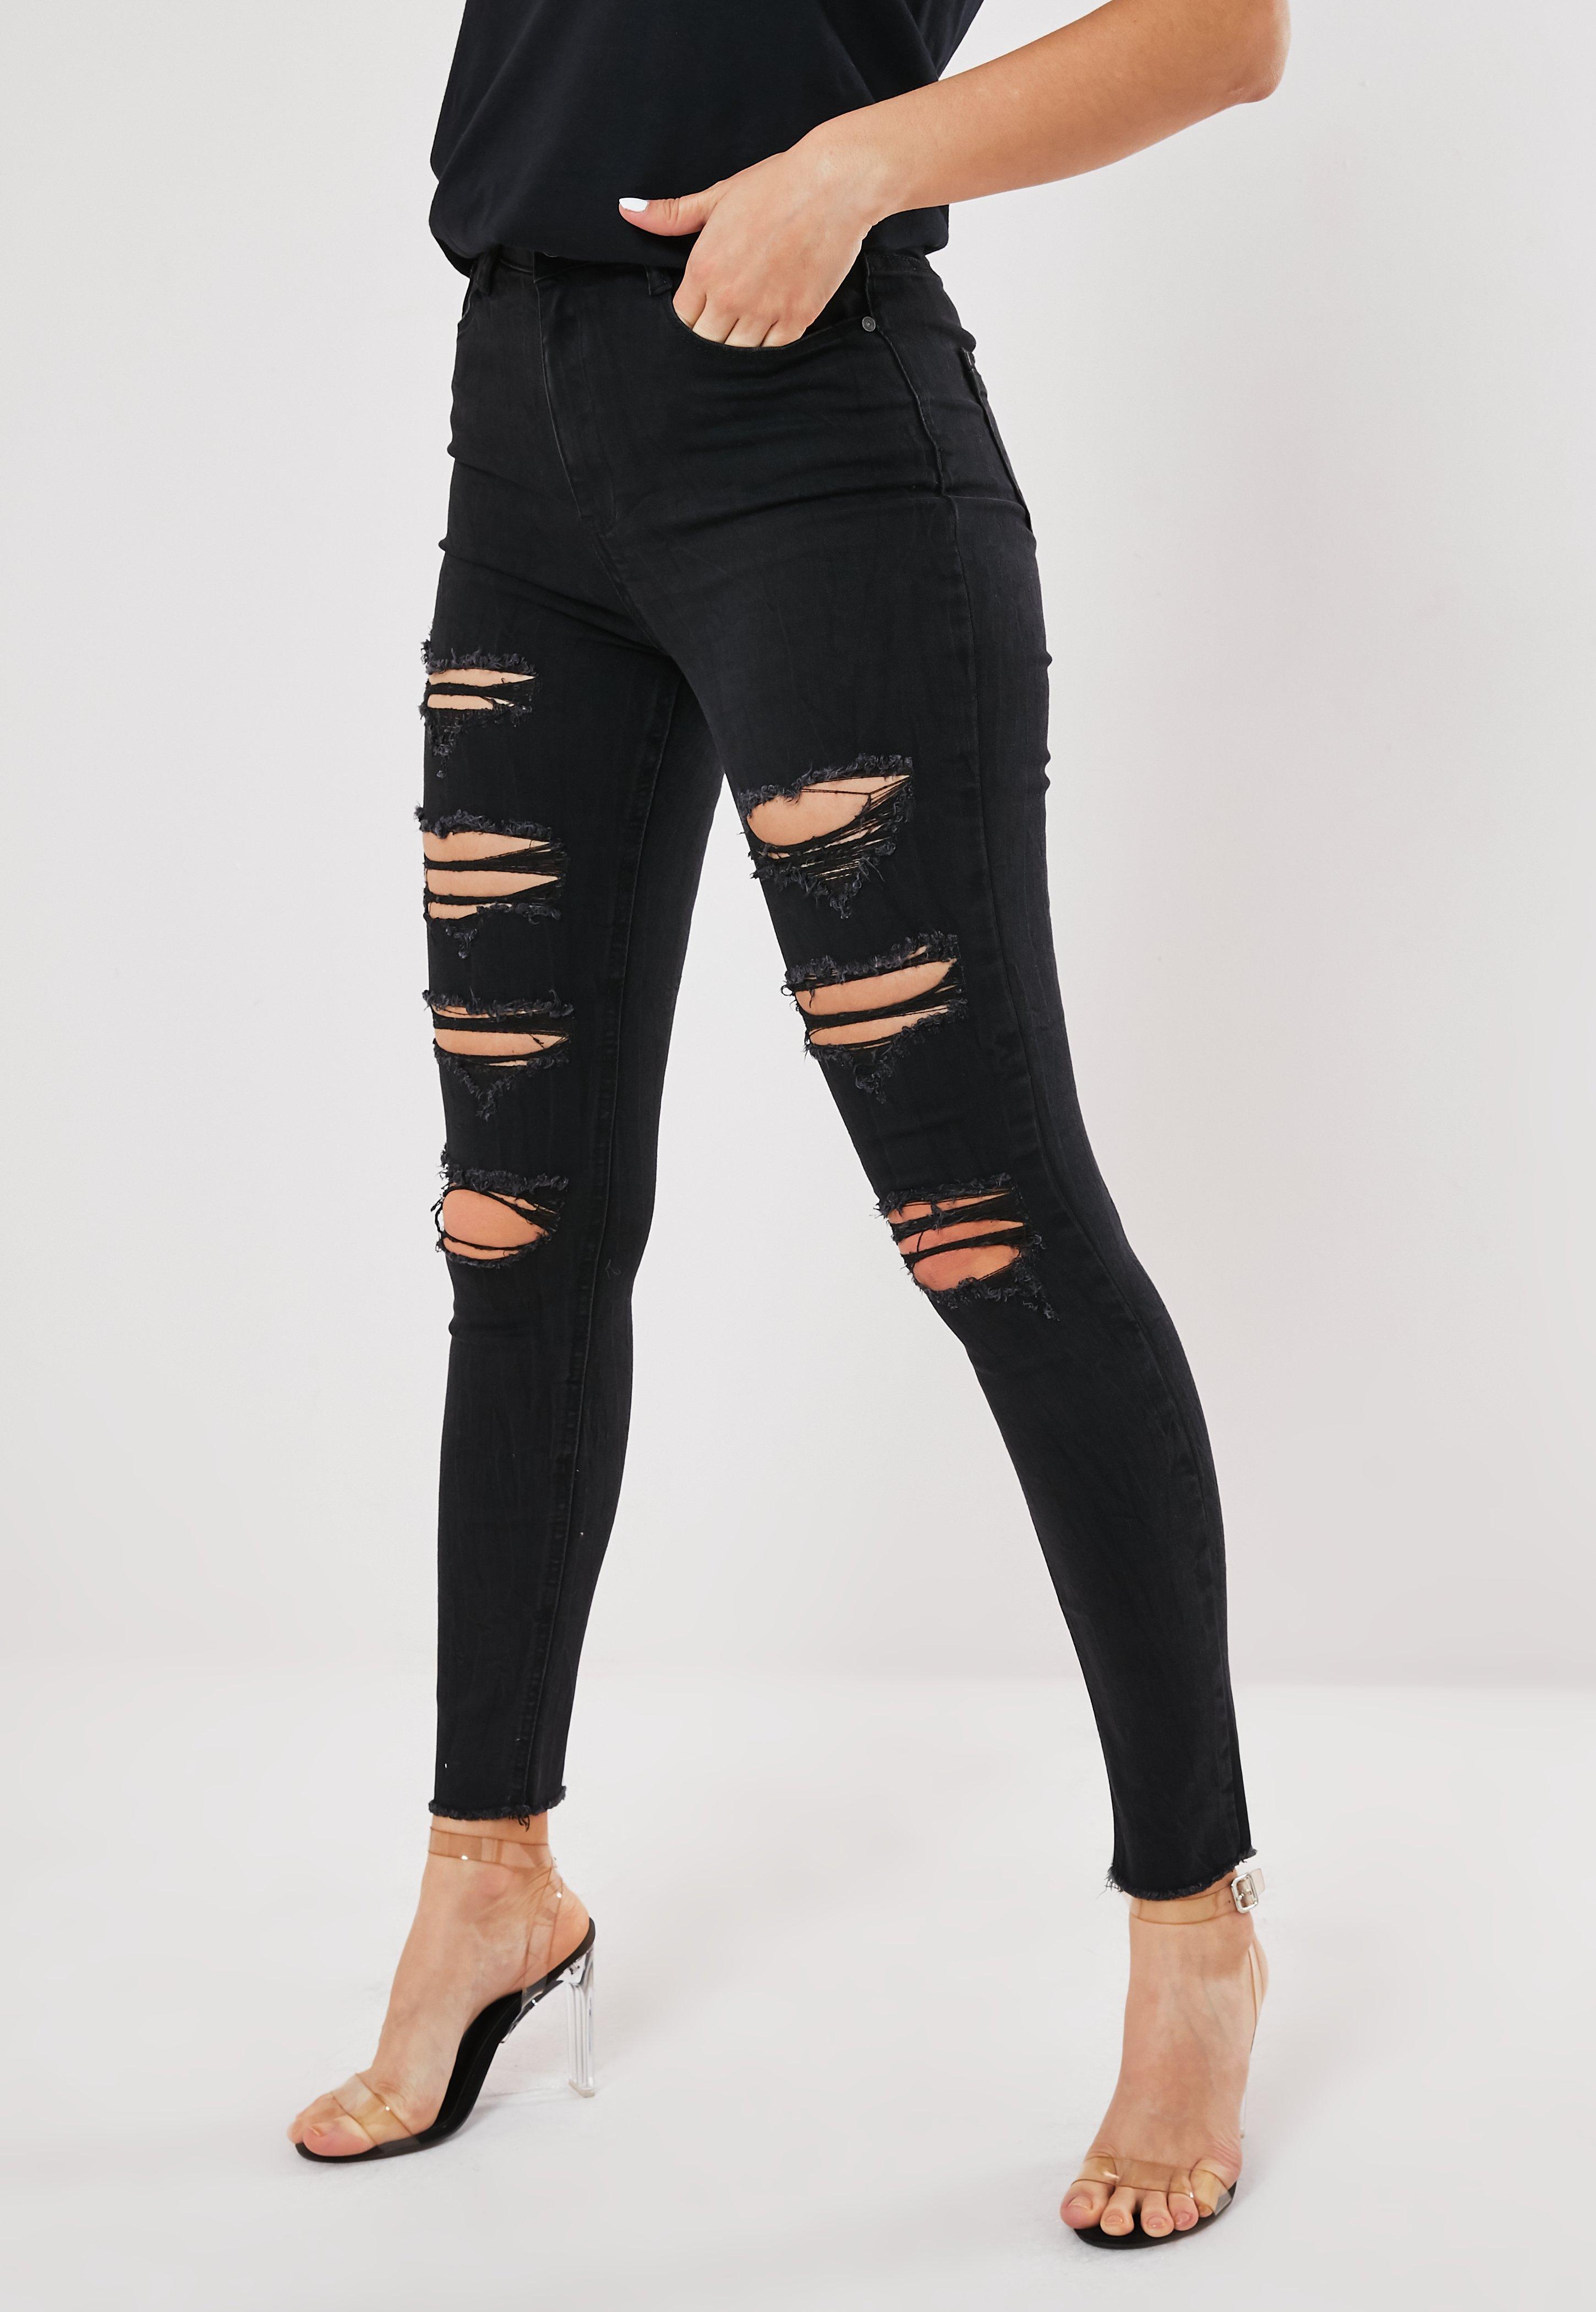 Missguided Denim High Waisted Extreme Ripped Skinny Jeans